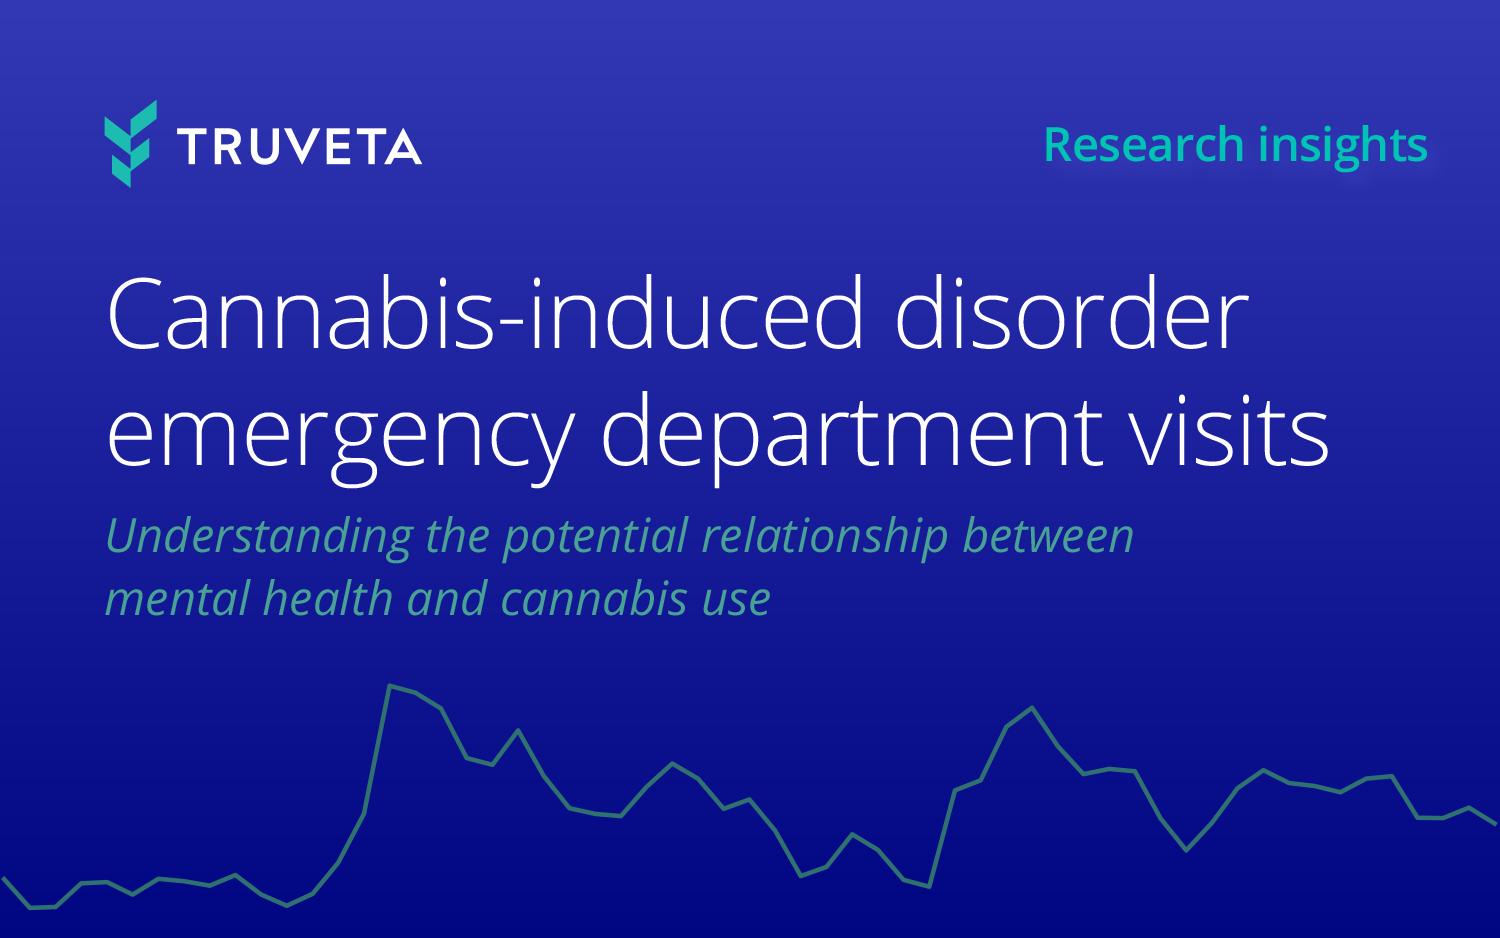 Between 2019 and 2020, Truveta Research found a nearly 50% increase in the rate of both cannabis-induced disorder emergency department visits and cannabis-involved emergency department visits.